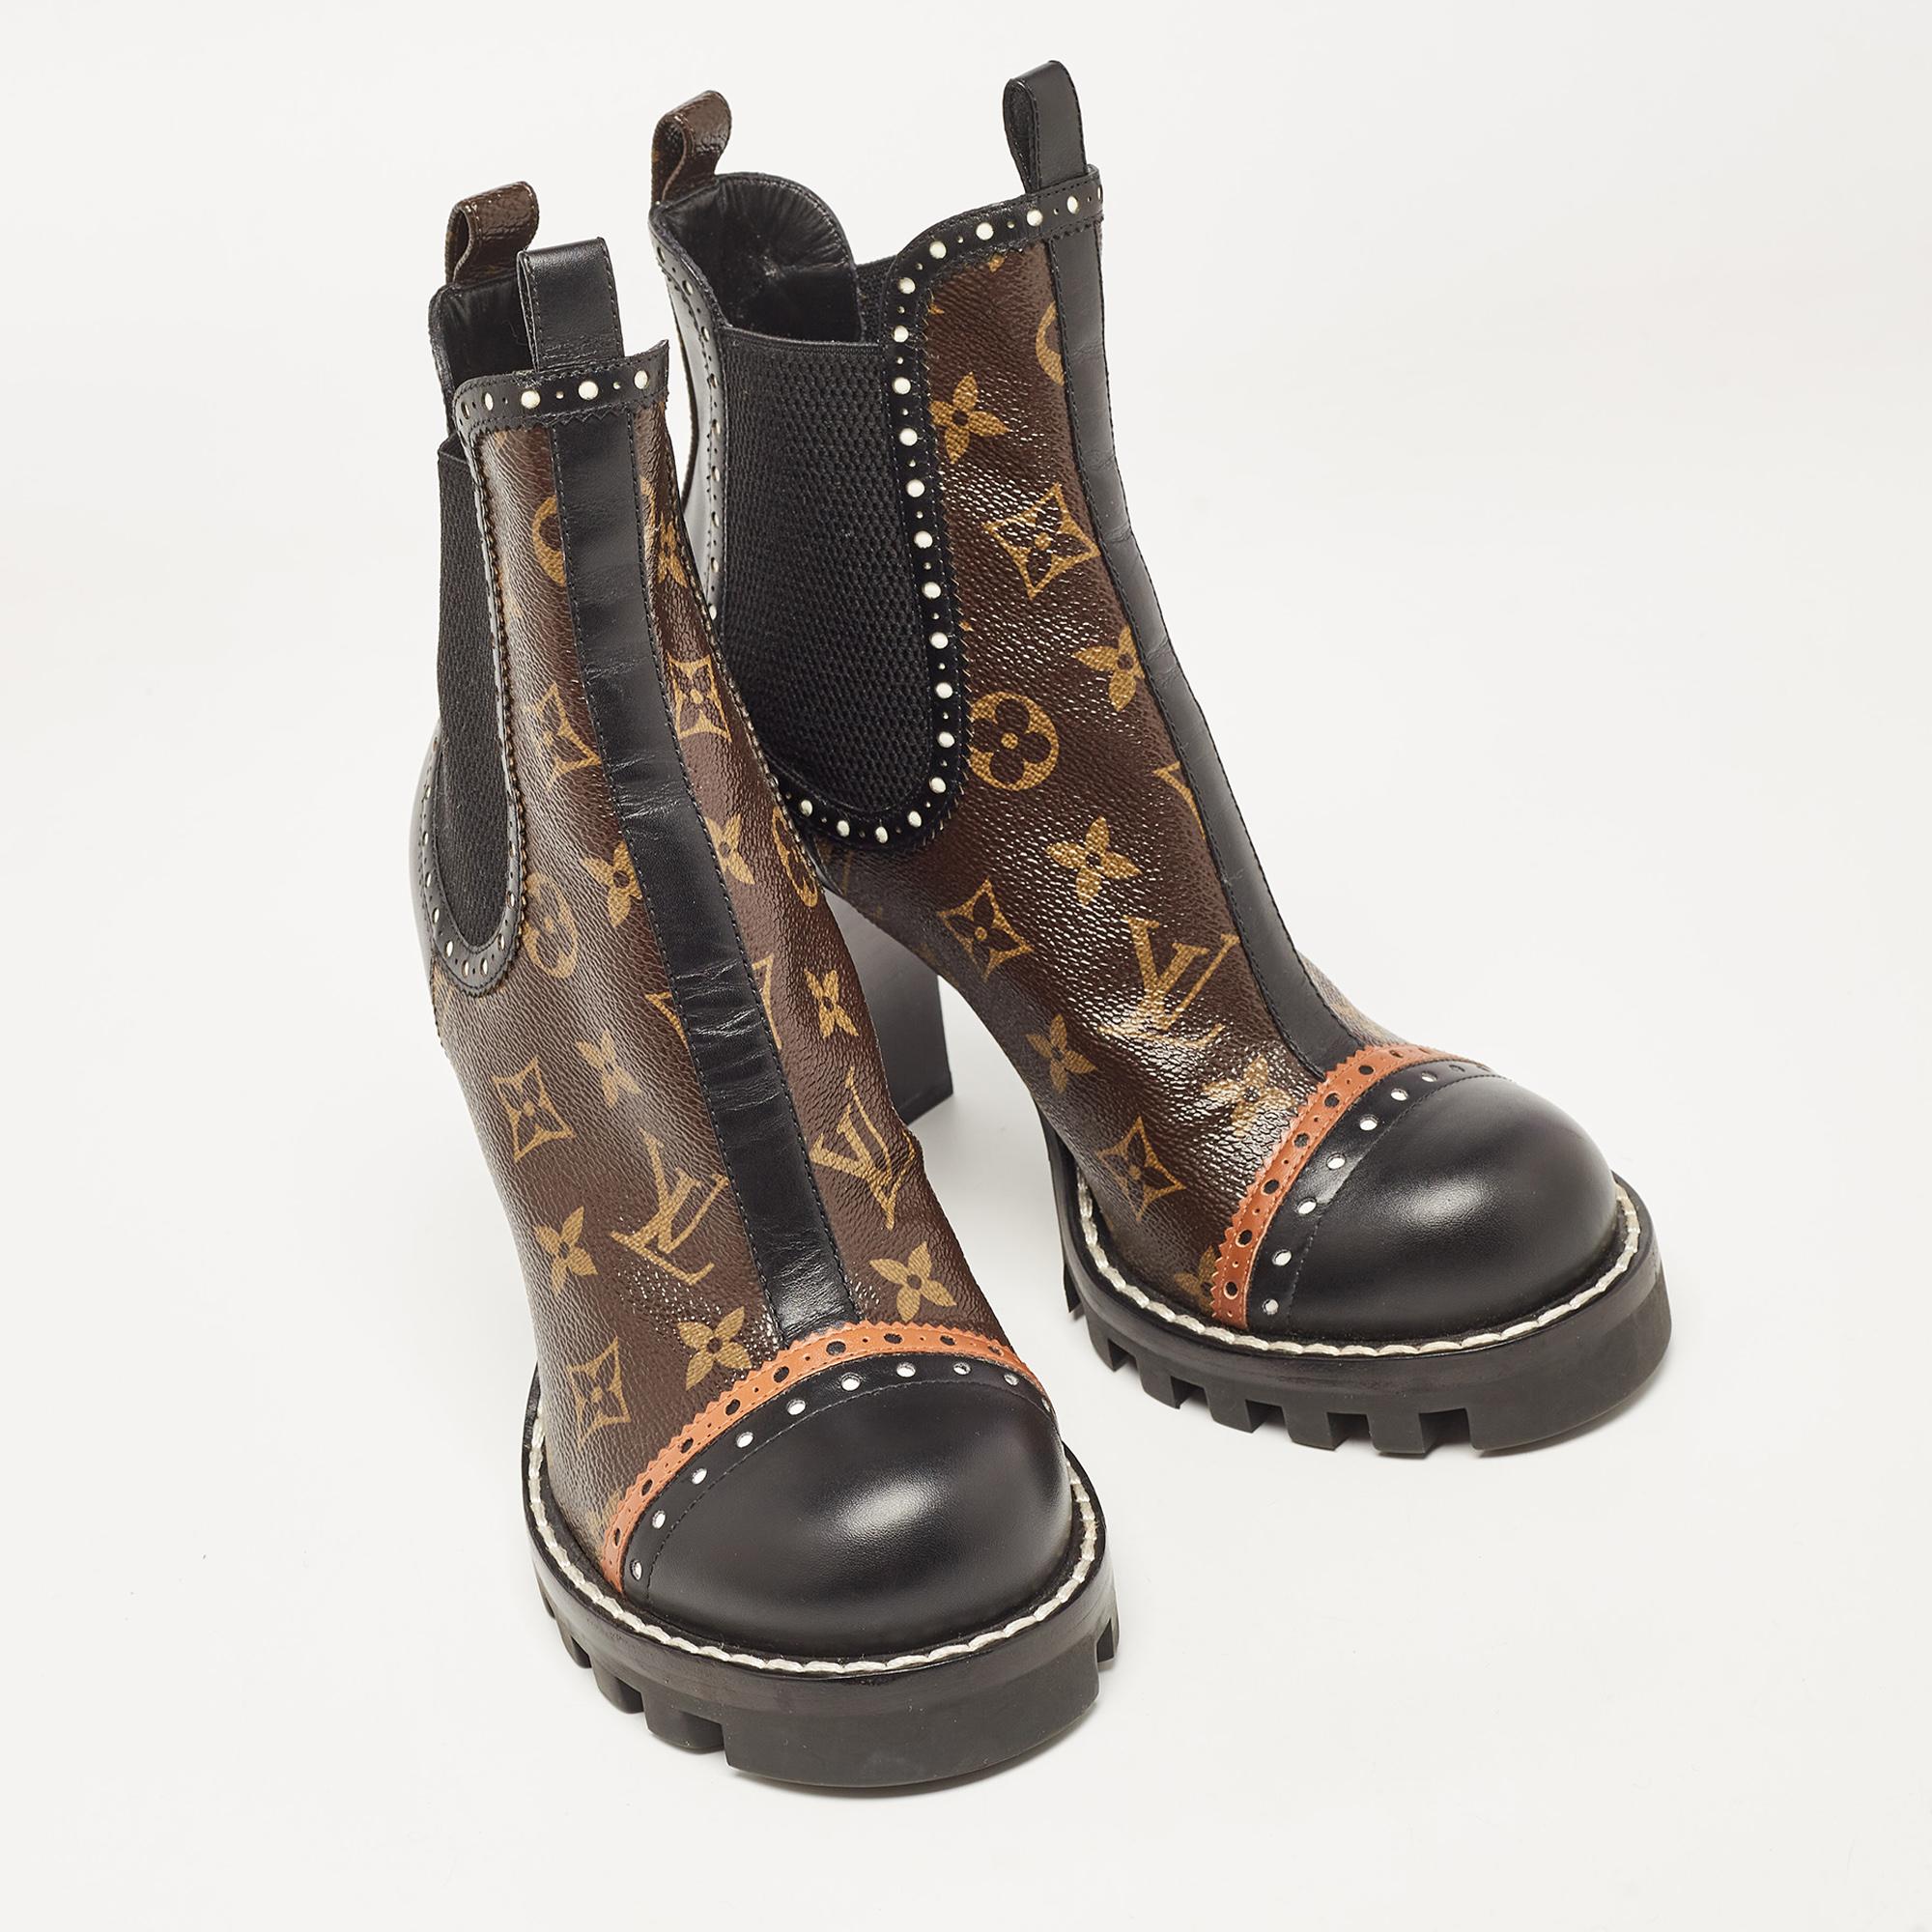 Boots are an essential part of your wardrobe, and these boots, crafted from top-quality materials, are a fine choice. Offering the best of comfort and style, this sturdy-soled pair would be great with a dress for a casual day out!

